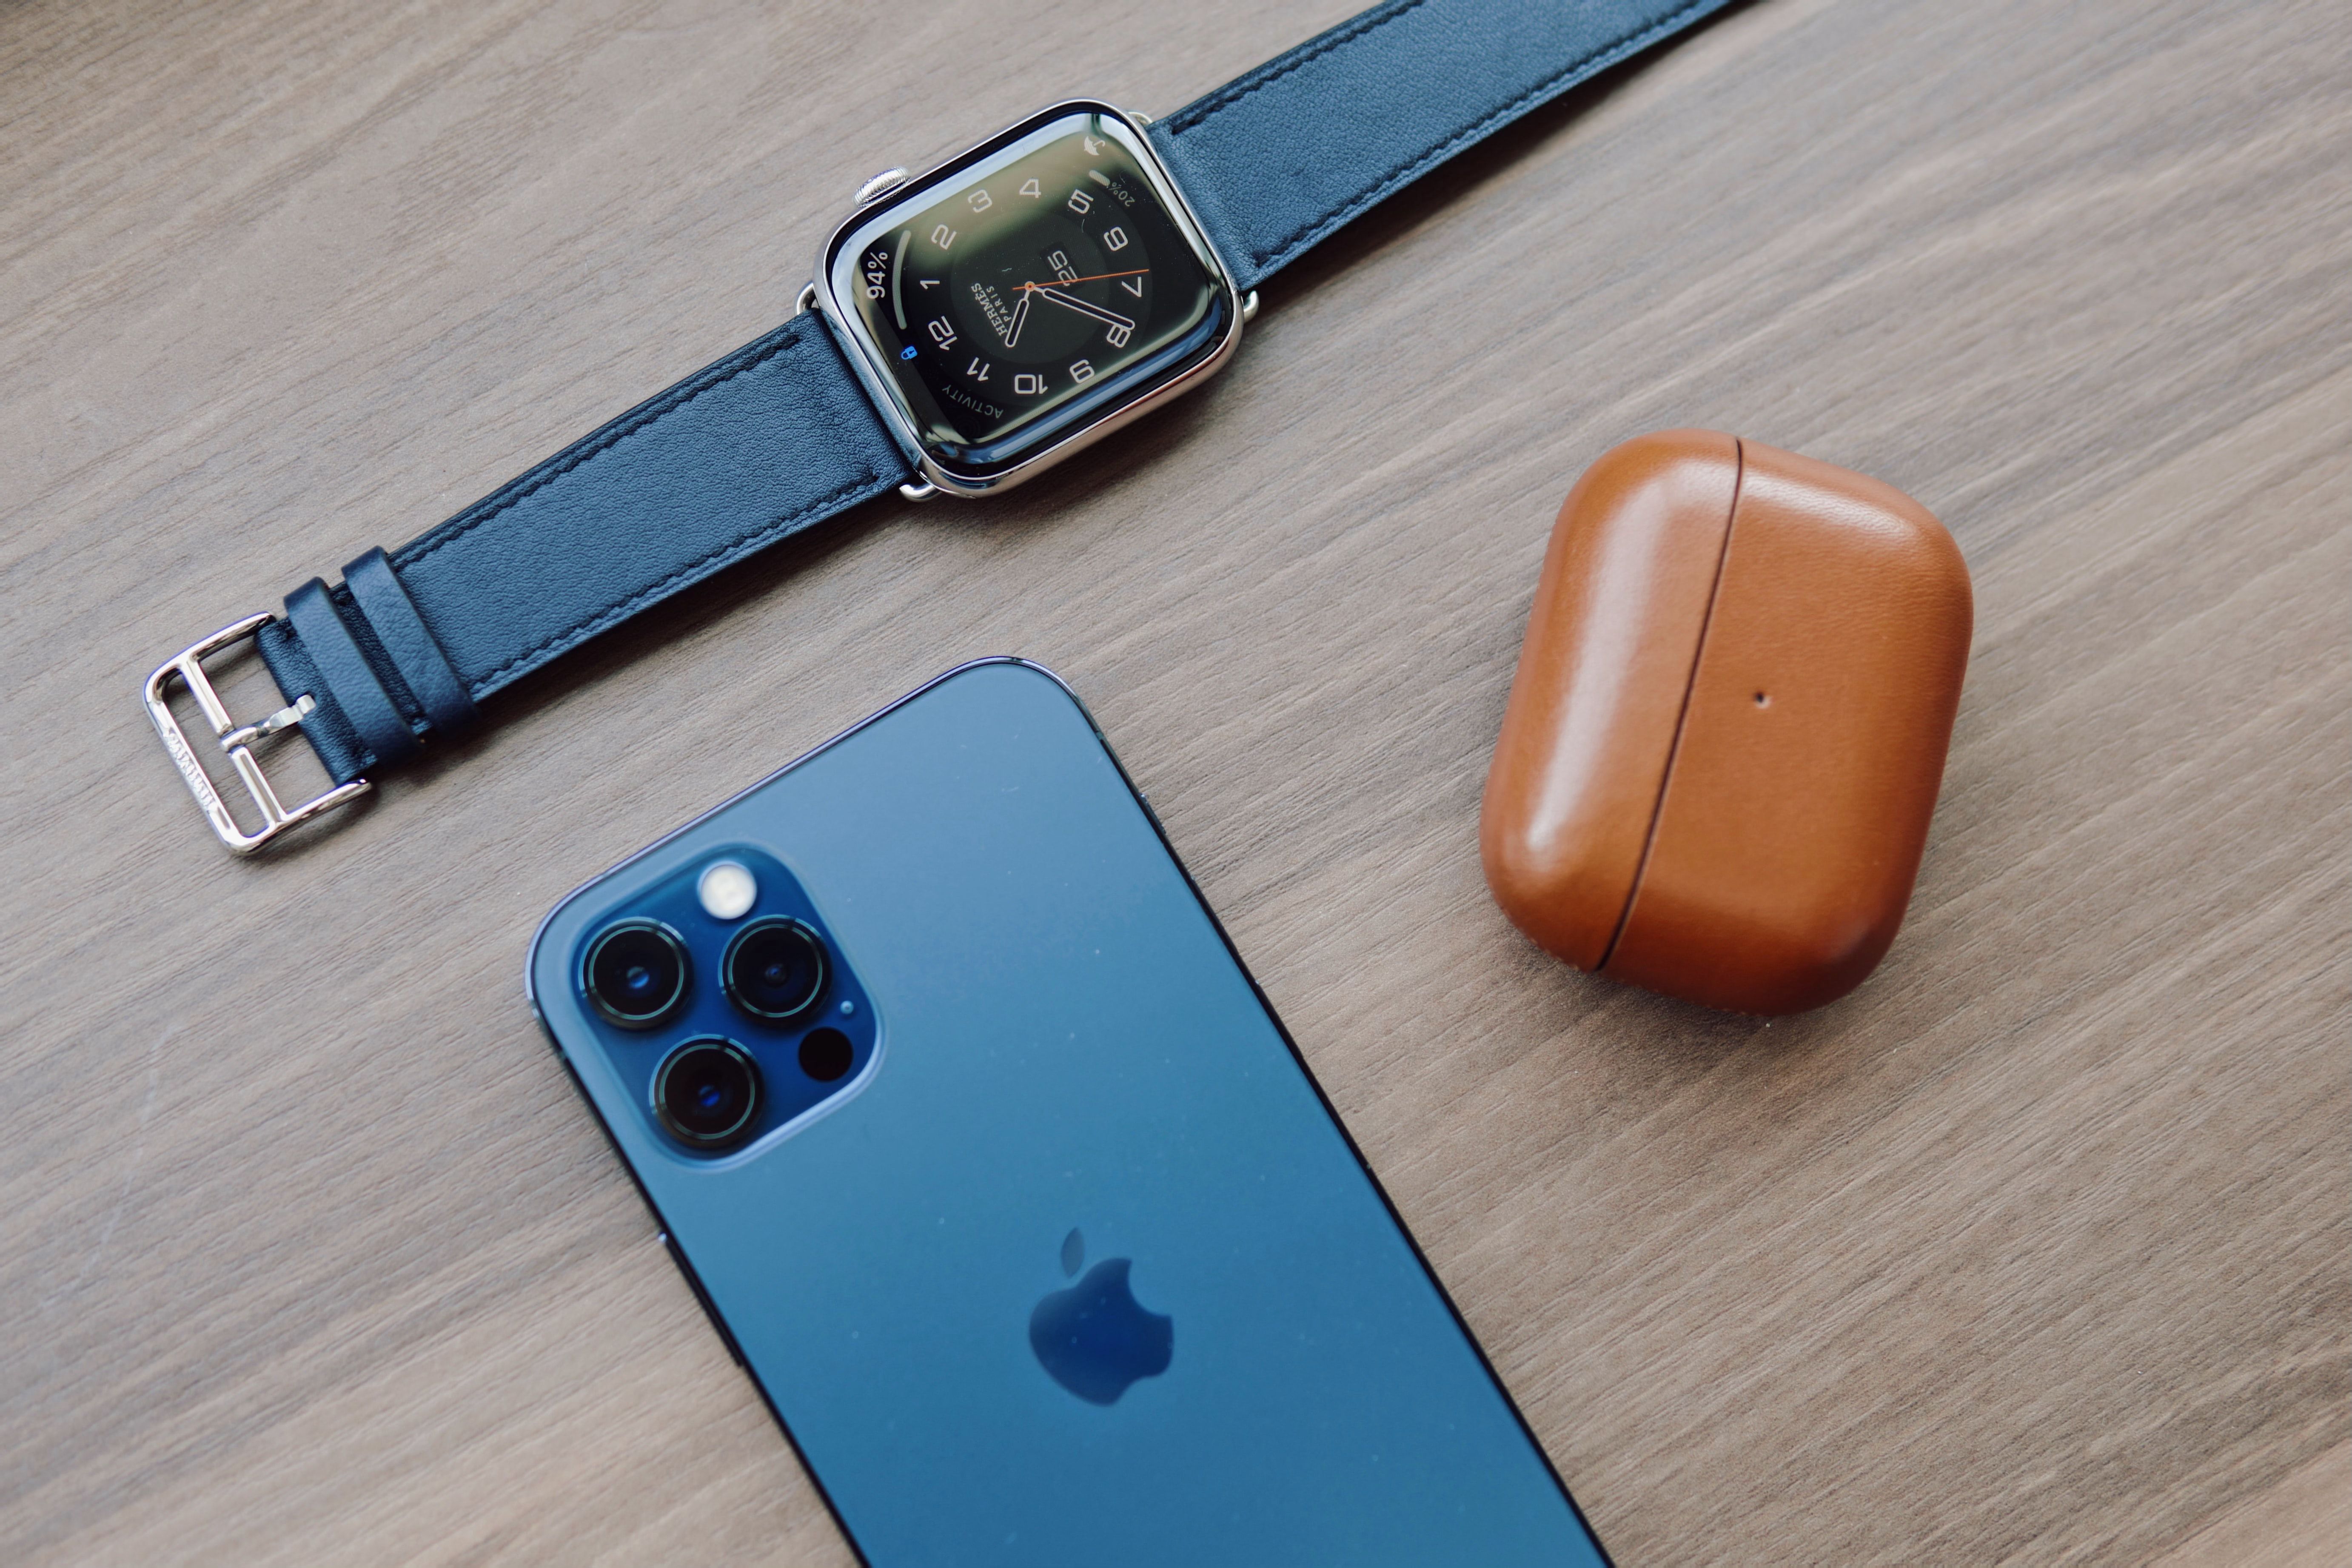 Apple Watch, iPhone, and AirPods together on a table.